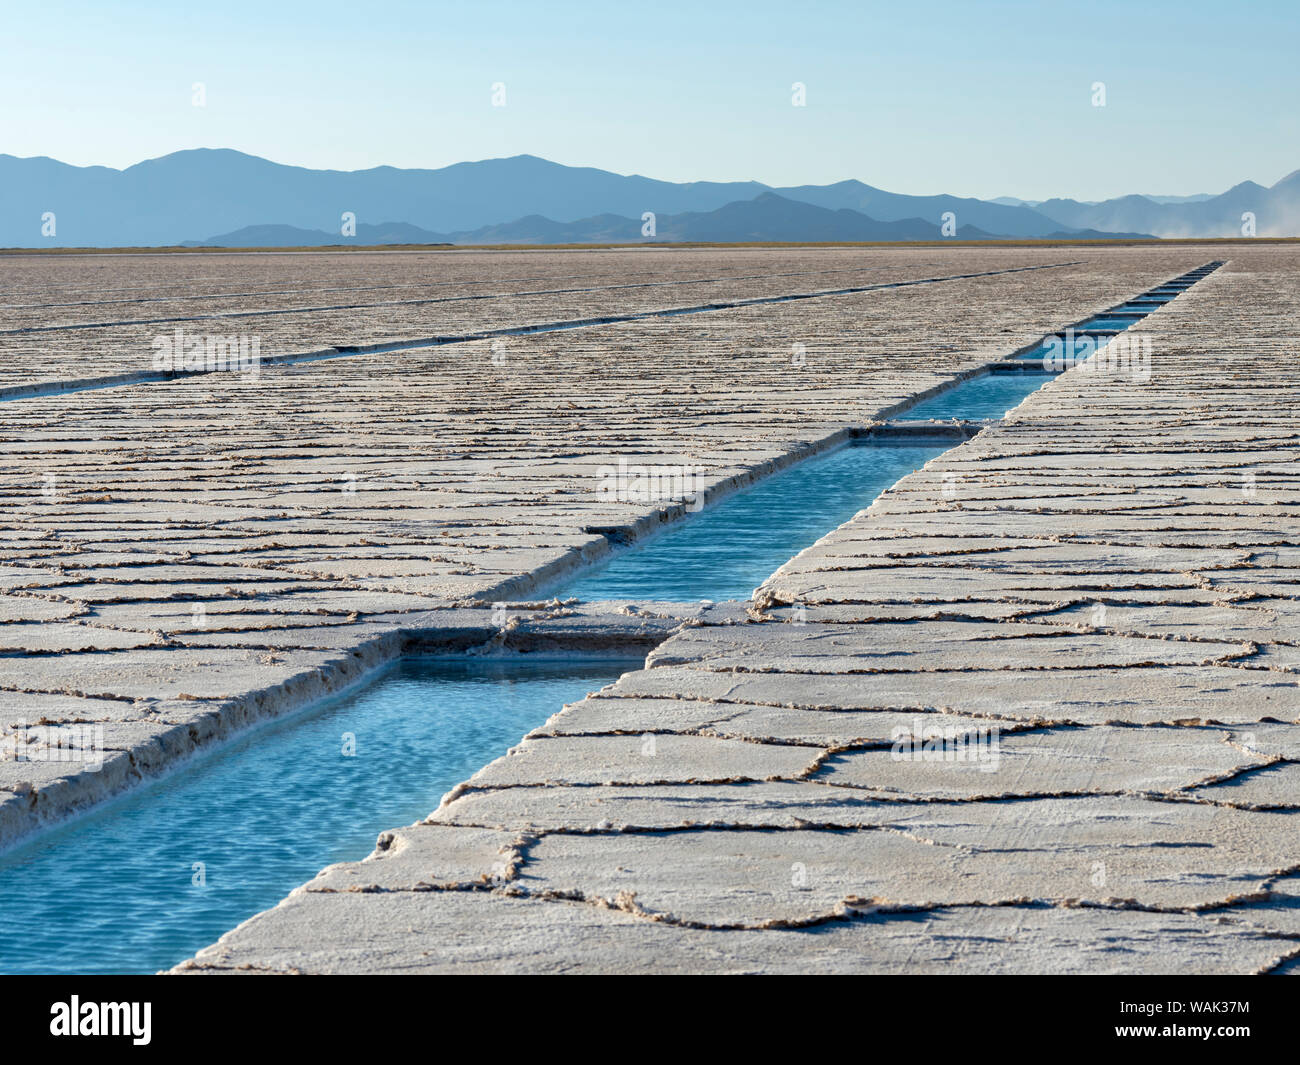 Salt processing area open to visitors Landscape on the salt flats Salar Salinas Grandes in the Altiplano, Argentina. (Editorial Use Only) Stock Photo